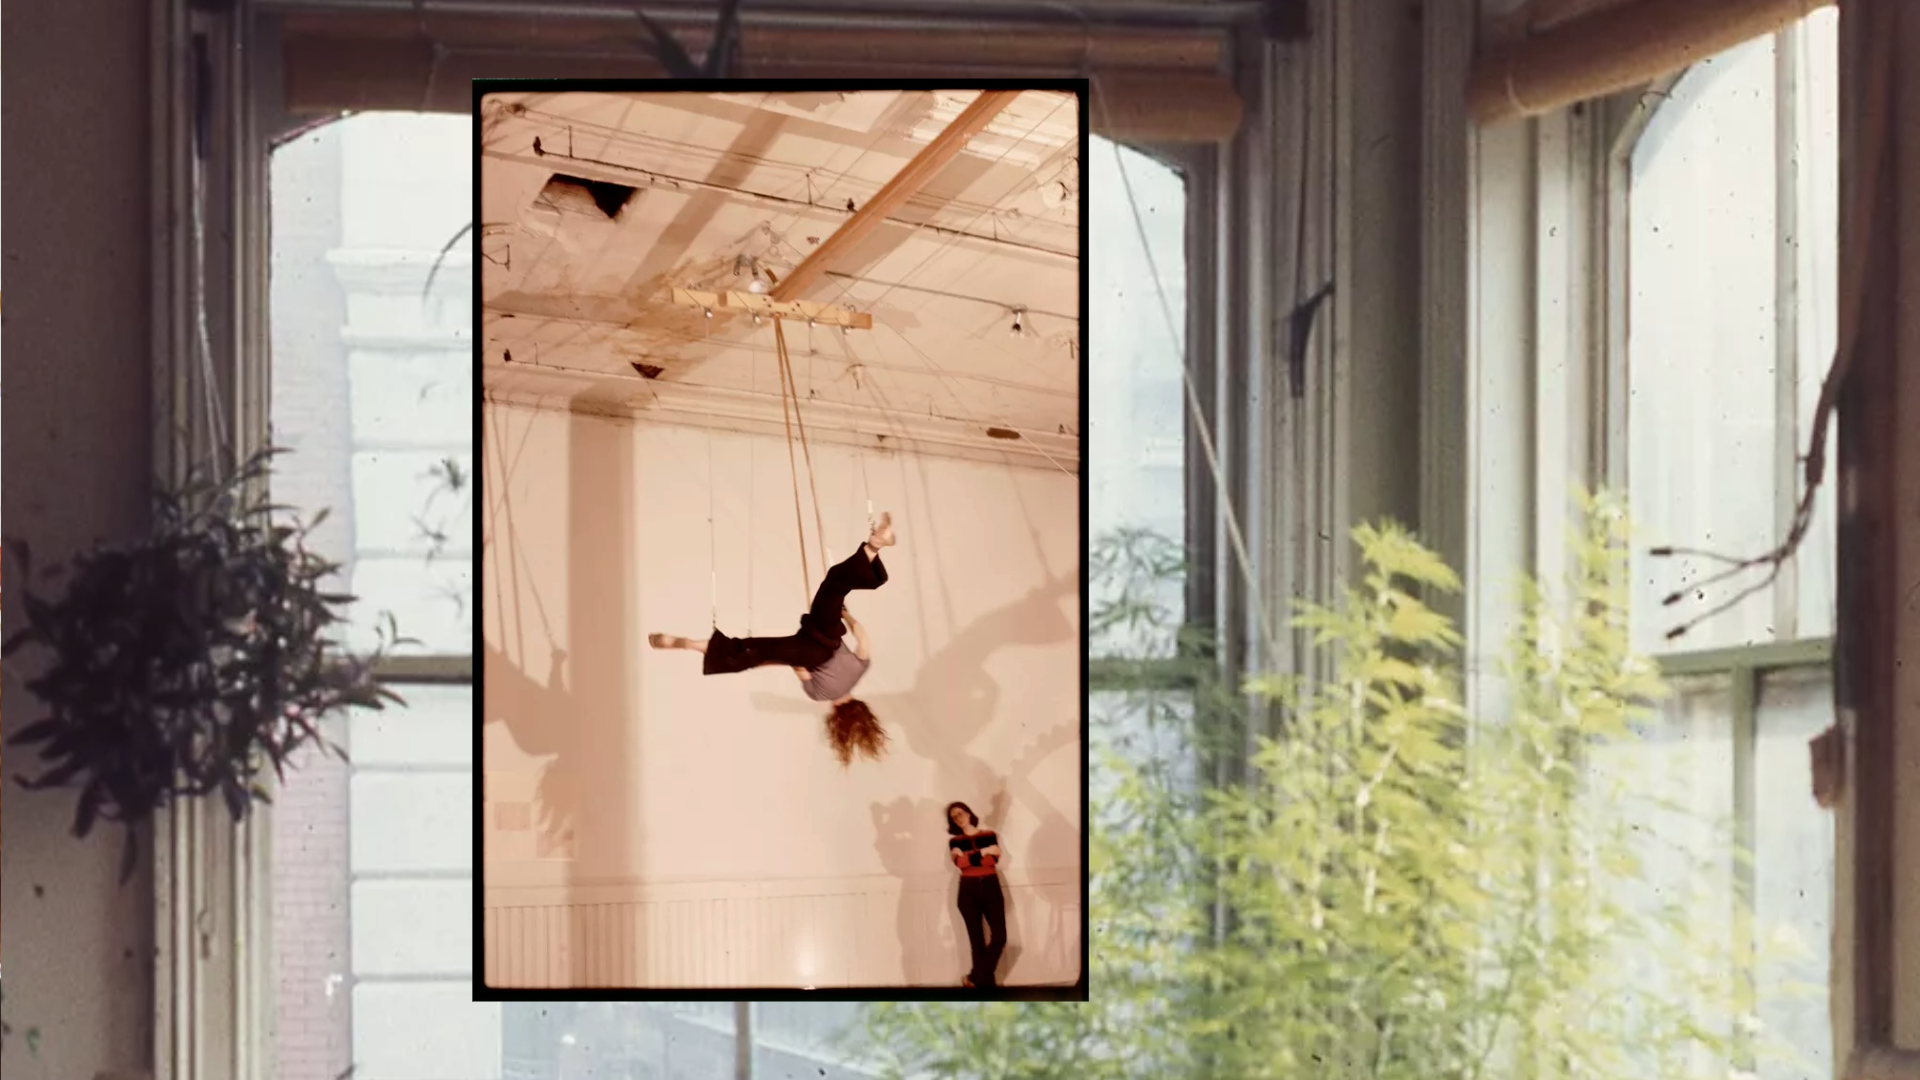 photo of a woman hanging upside down from a loft ceiling on top of photo of a loft interior with books and plants